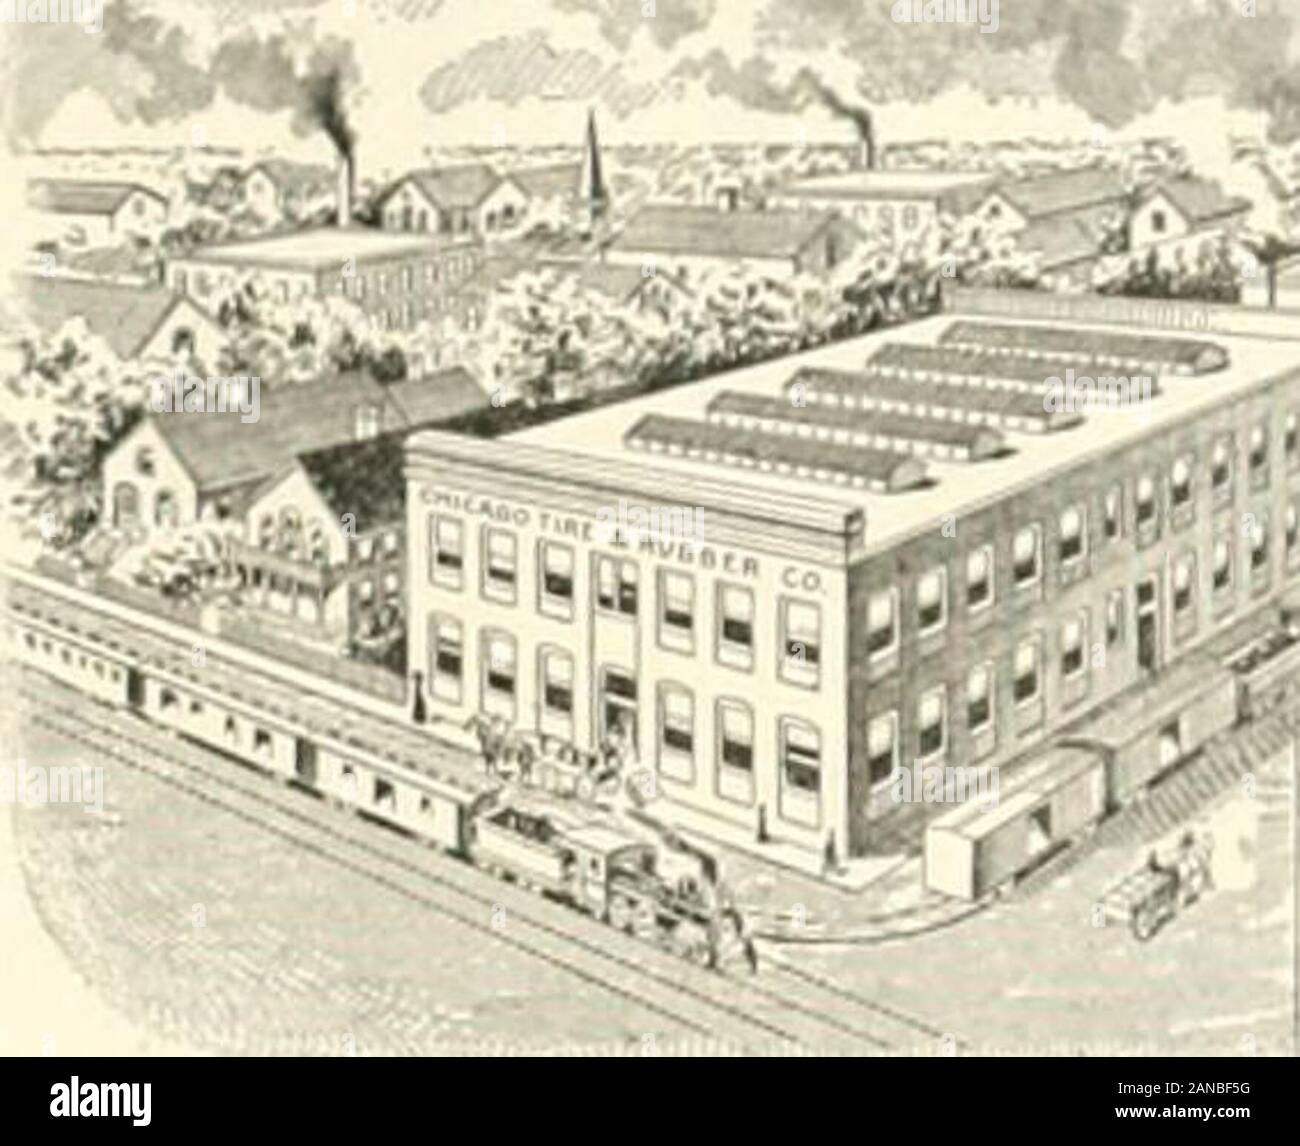 India rubber world . SPECIALTY: HARD RUBBERCOMBS. Olive Dore, Helios, Reform and Sawing Han BRANDS OF COMBS.Headquarters for the United States: SCHRADER &. EHLERS, 335 BROADWAY, NEW YORK.Mention the India B1 n Id when yon write. YATMAN RUBBER CO., MOULDED SPECIALTIES IN SOFT RUBBER. ERASIVE RUBBER. OFFICE AMD FACTORY: No. 608 Passaic Avenue,HARRISON, N. J. I@-WR1TE FOR ESTIMATES. Mention The India Rubber World when you, write.  SYRINGE BOXES- OF WHITE WOOD, BASS, OAK, ASH, &c FINE WORK. LOW PRICES PROMPT SHIPMENT. Estimates and Samples Furnished on Application. ALSO ANY OTHER KINO OF FANCY WO Stock Photo